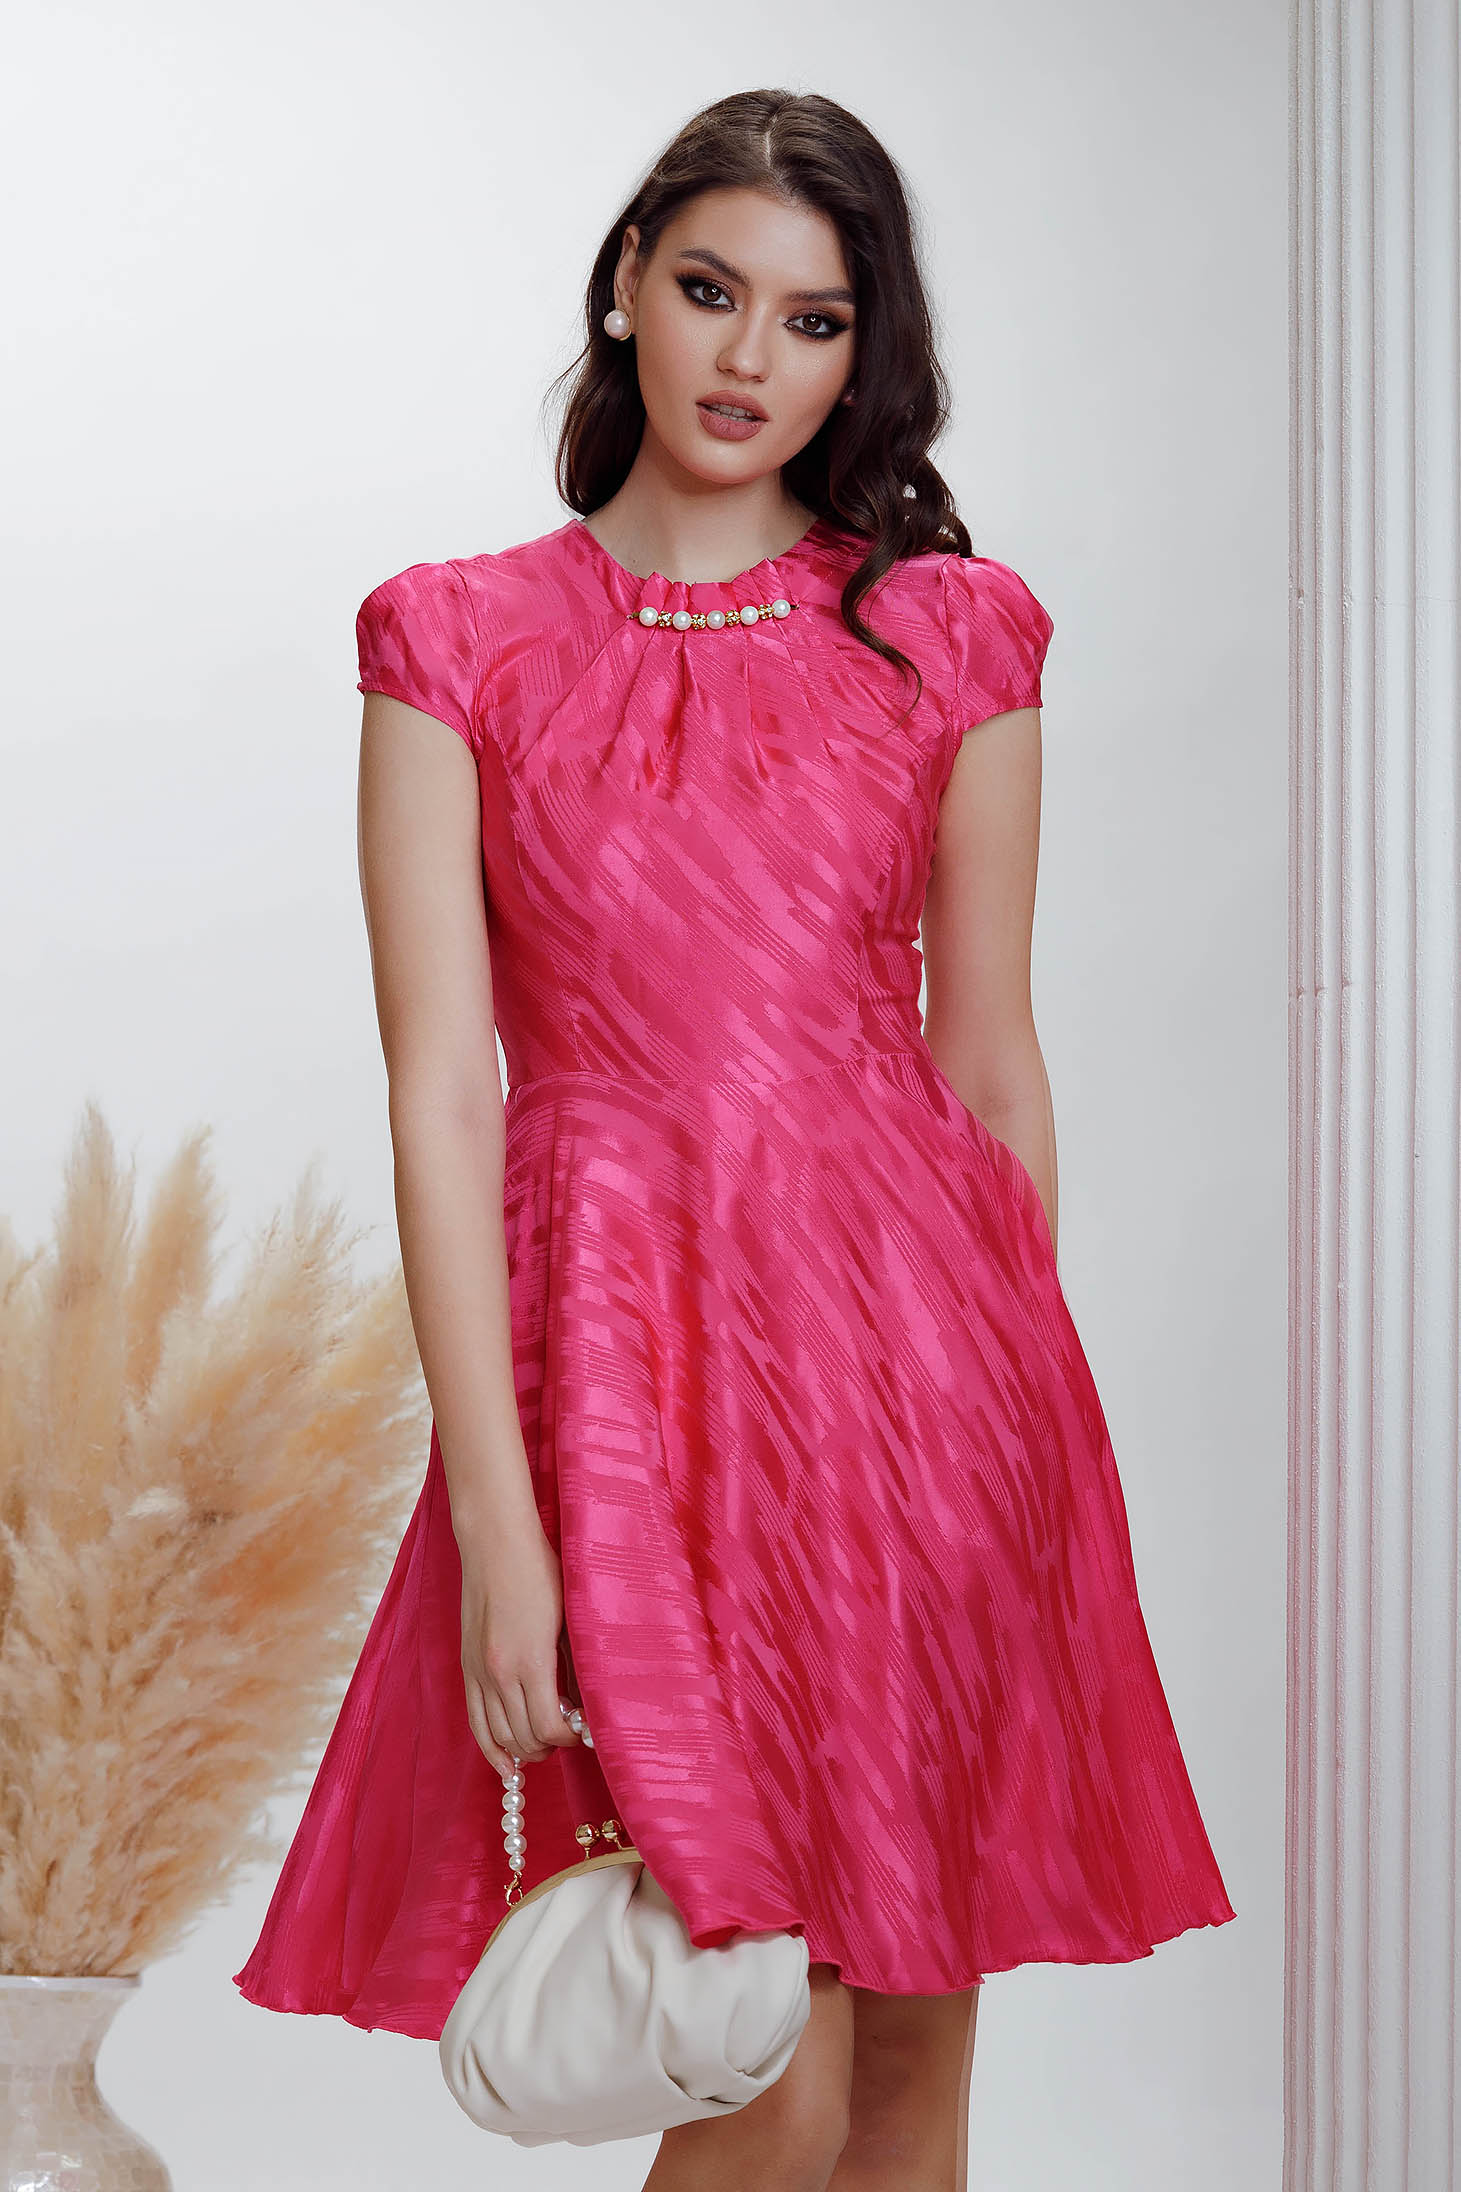 Pink dress from satin fabric texture cloche lateral pockets metallic chain accessory